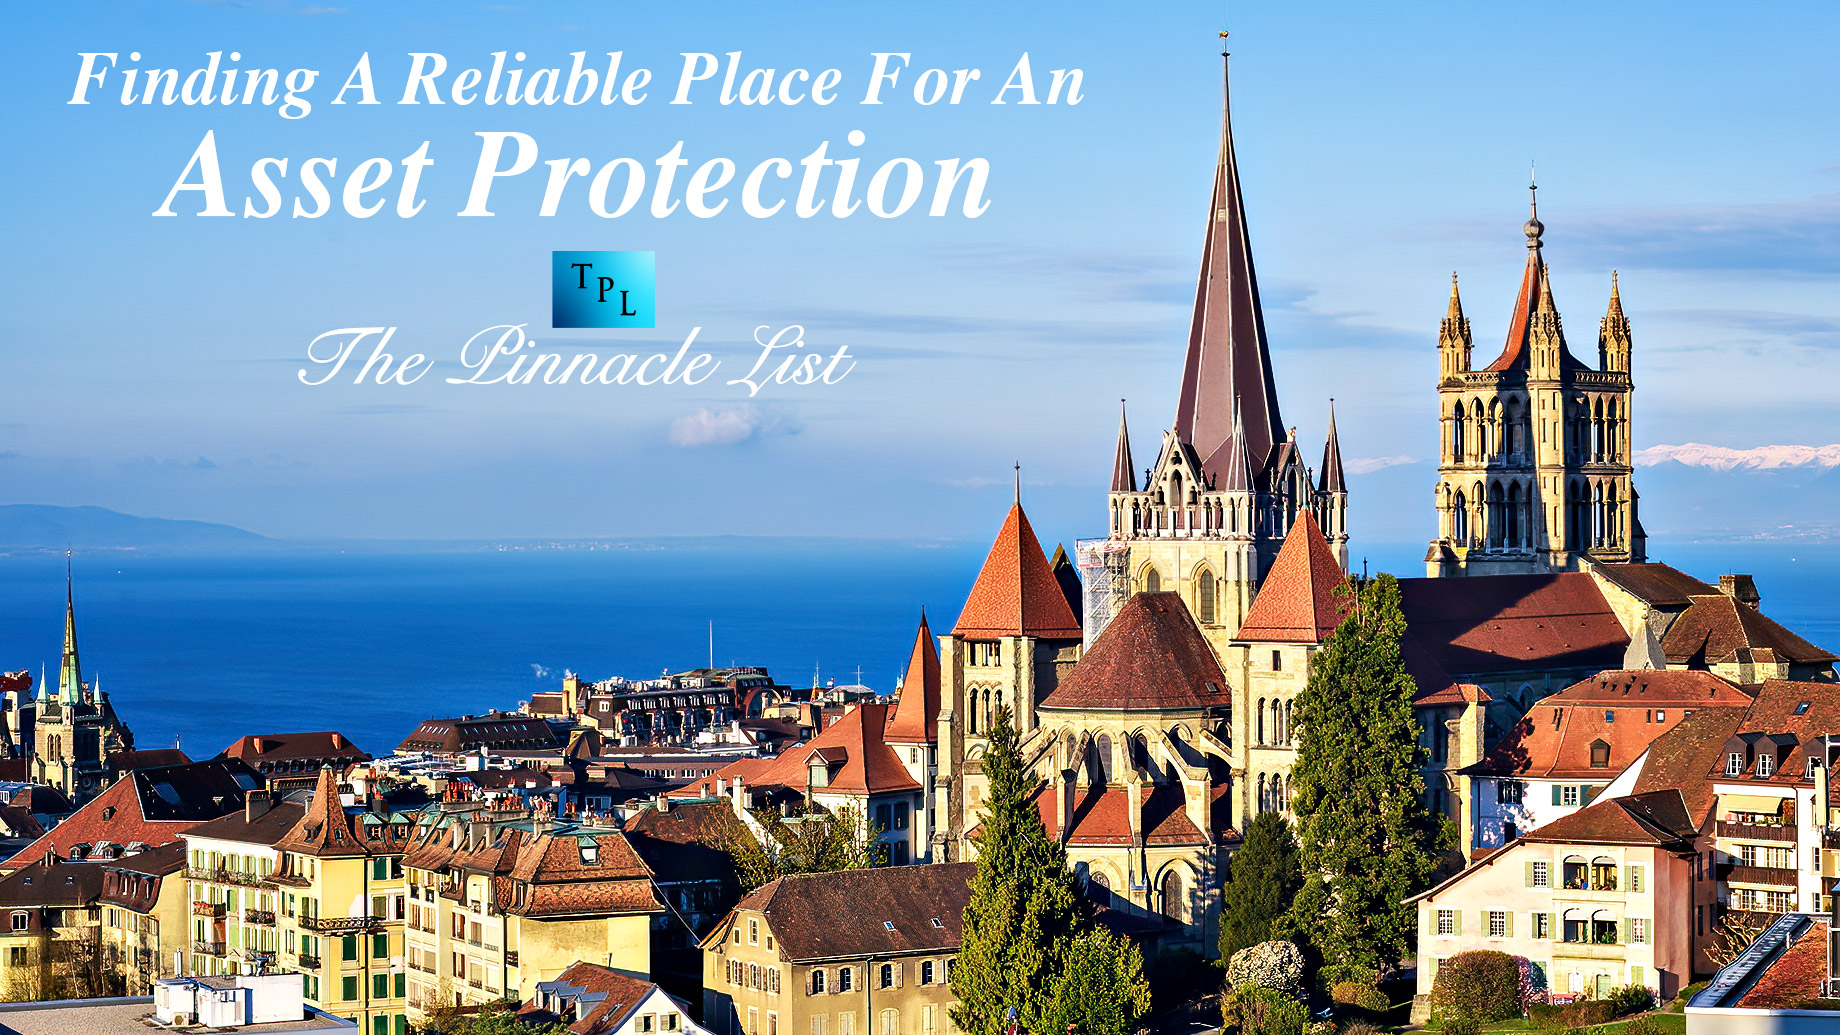 Finding A Reliable Place For An Asset Protection